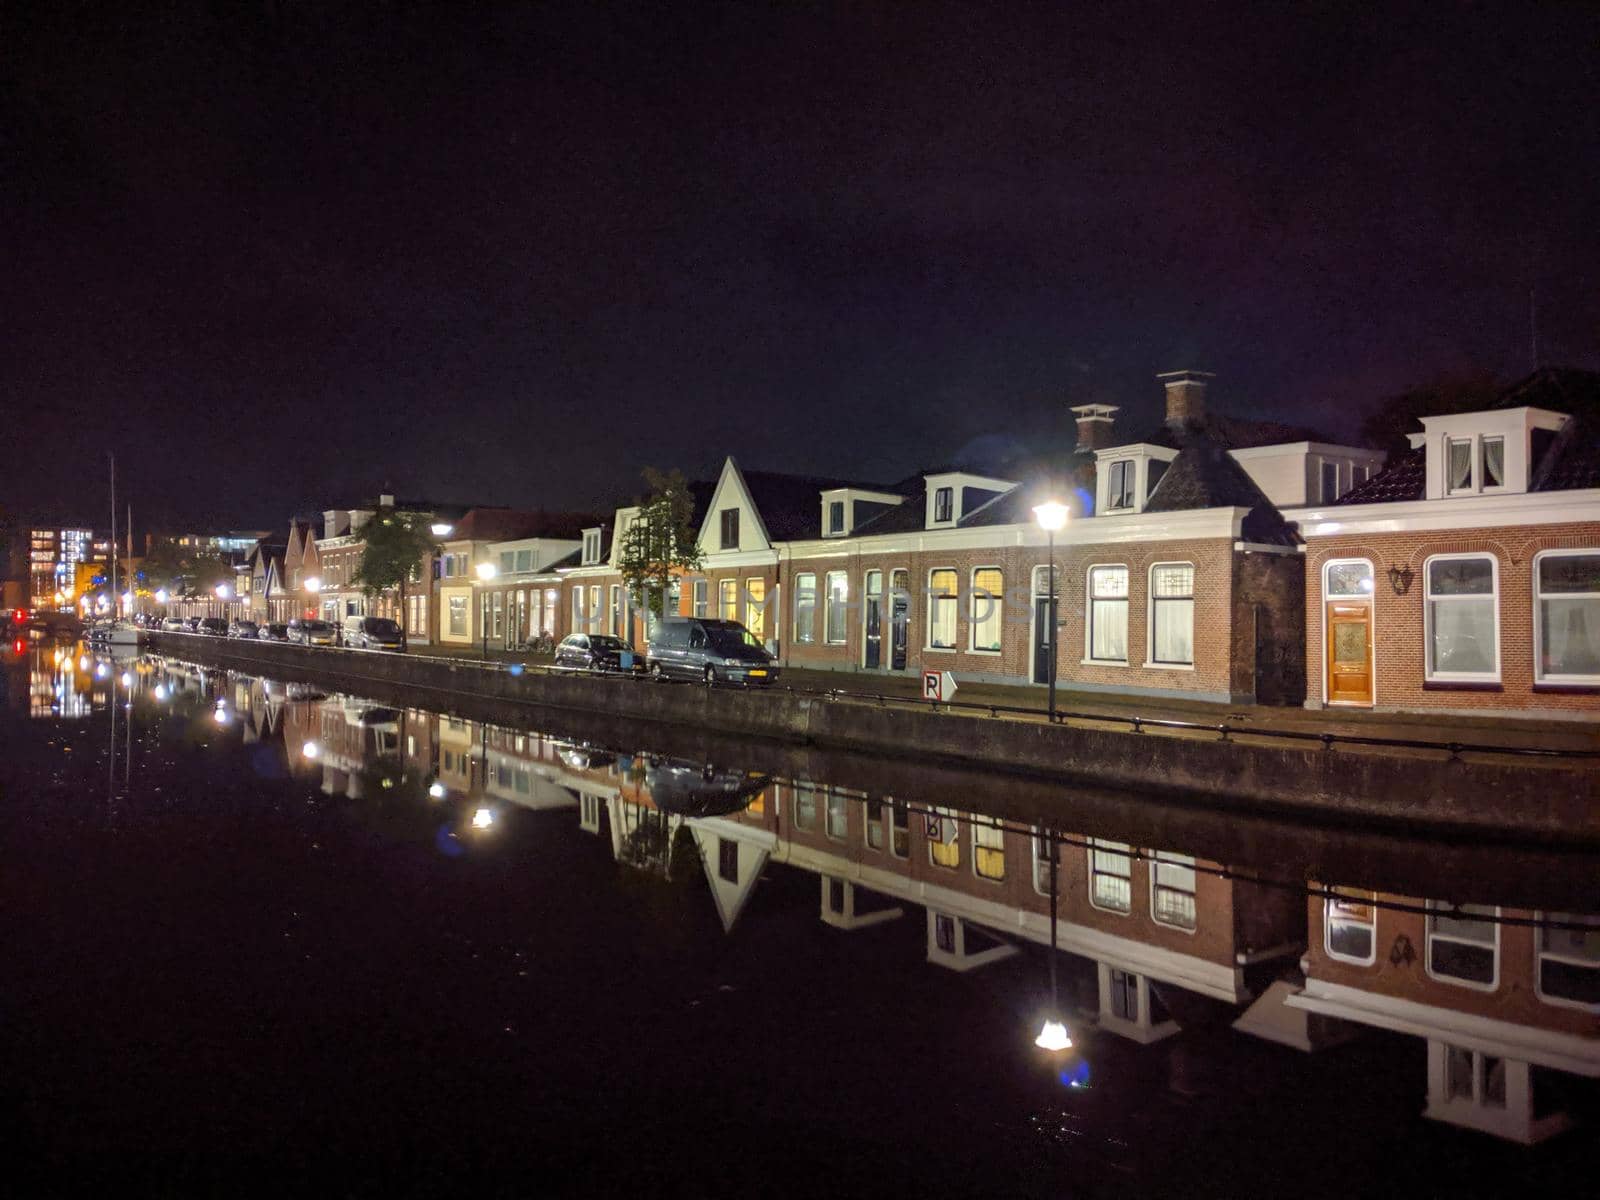 Housing along the canal at night in Sneek, Friesland, The Netherlands